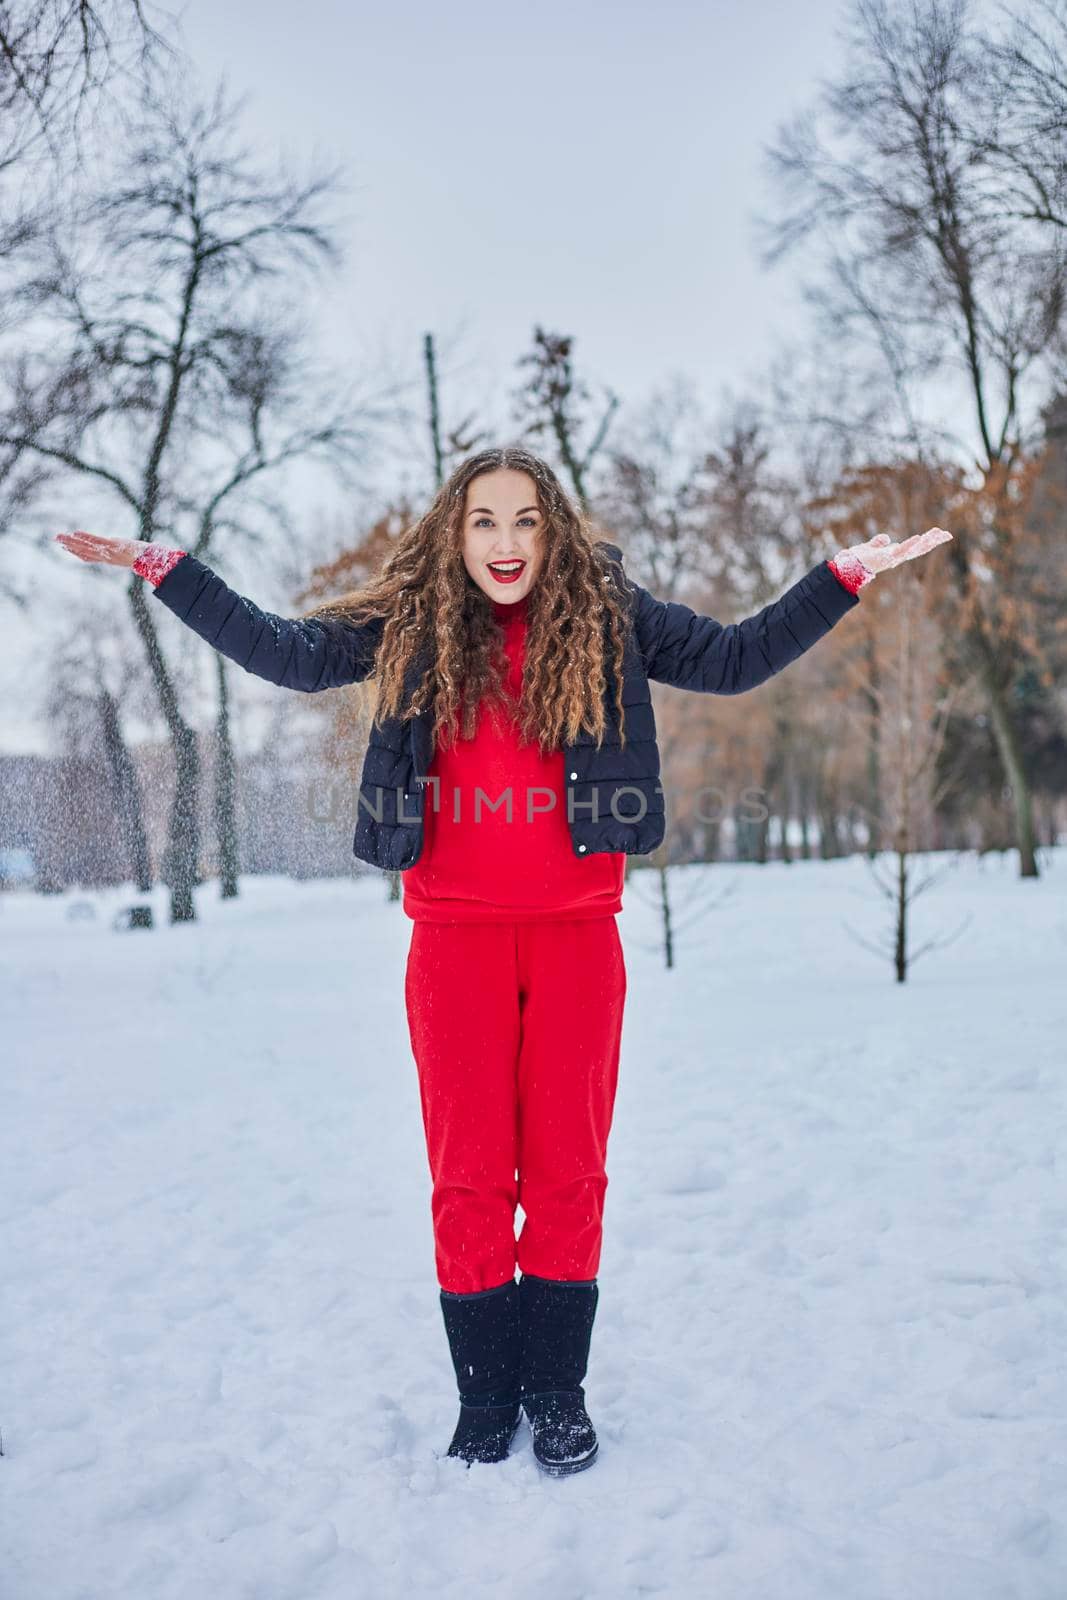 a young happy woman is having fun in a winter park, throwing snow, it is cold in her hands, the emissions are off scale. by mosfet_ua